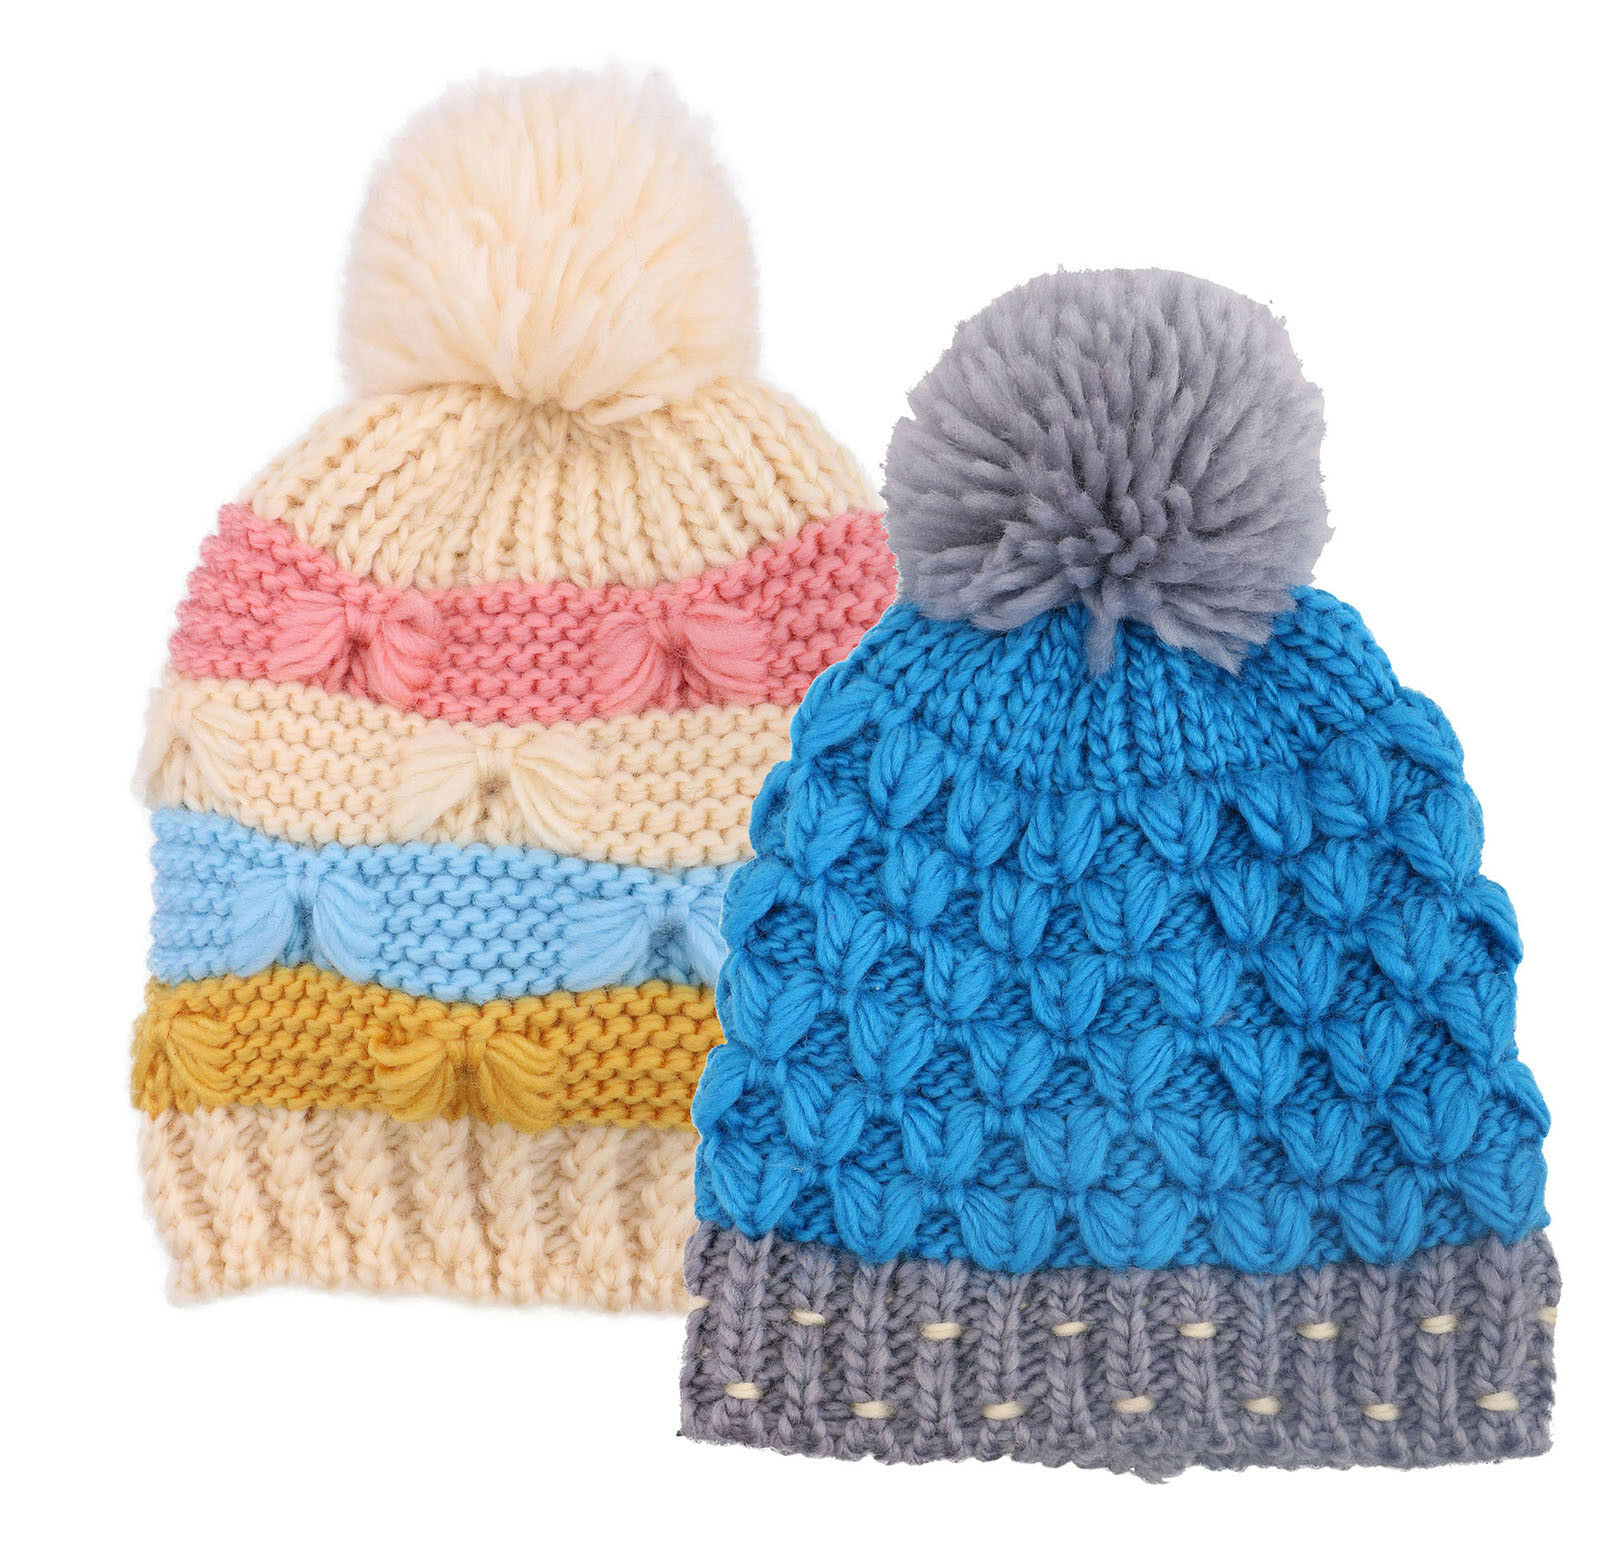 2 Pcs Set Kids Toddlers Chunky Cable Knit Yarn Pompom Beanie Winter Warm Hat Cap